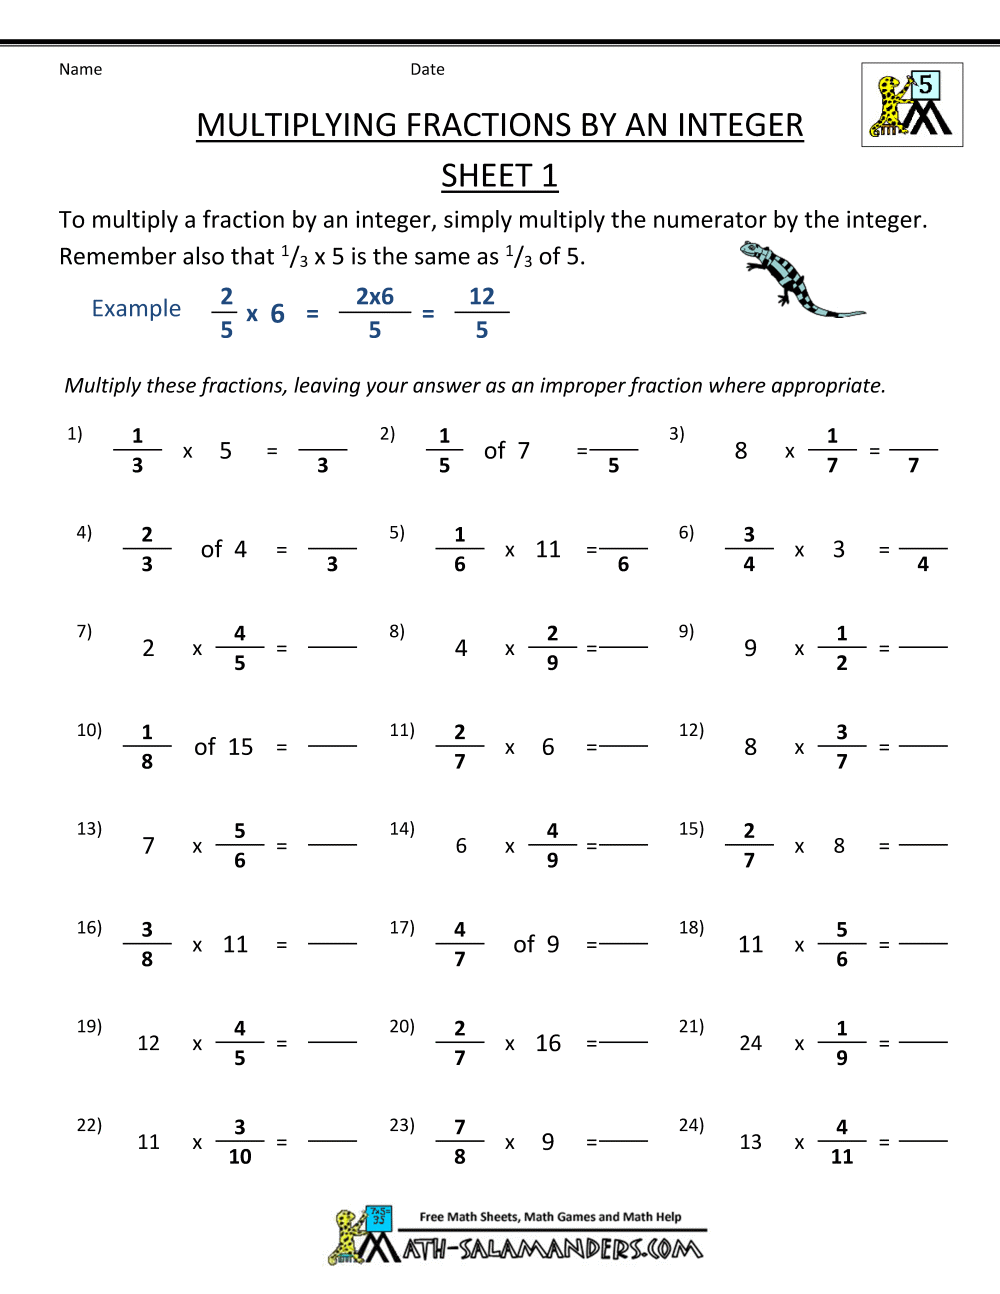 Multiplication And Division Integers Worksheets